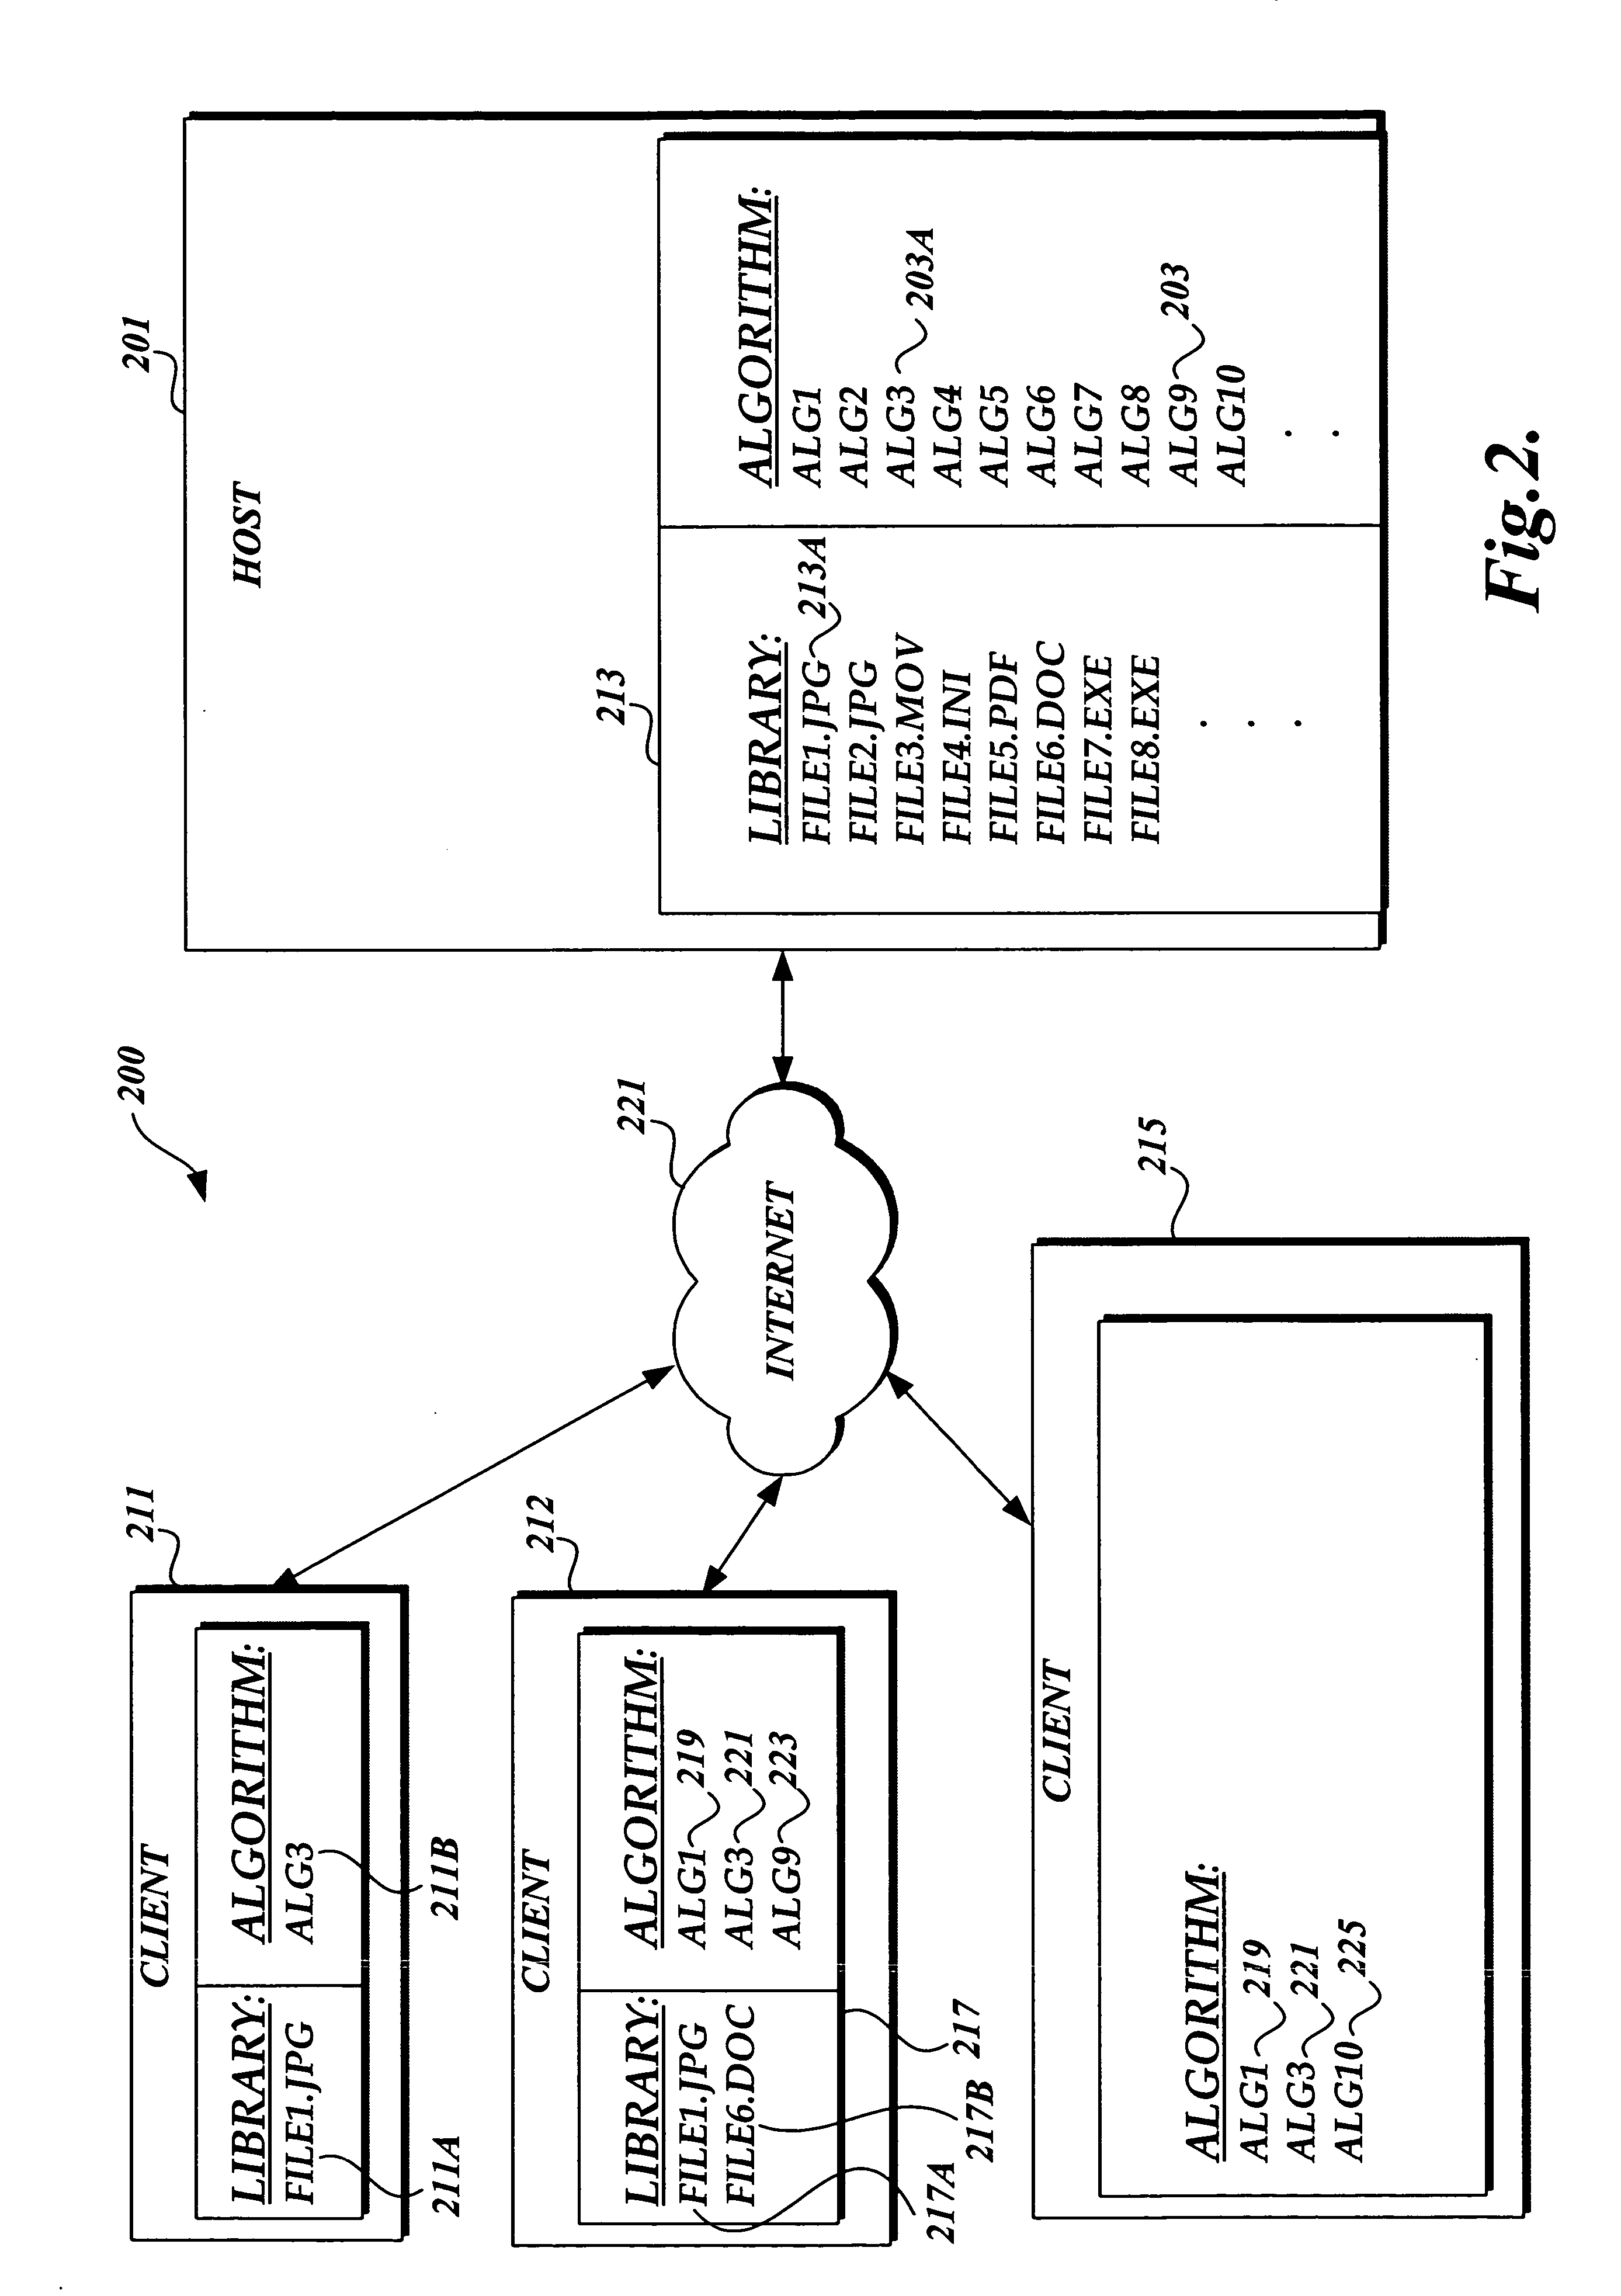 System and method for dynamic generation of encryption keys